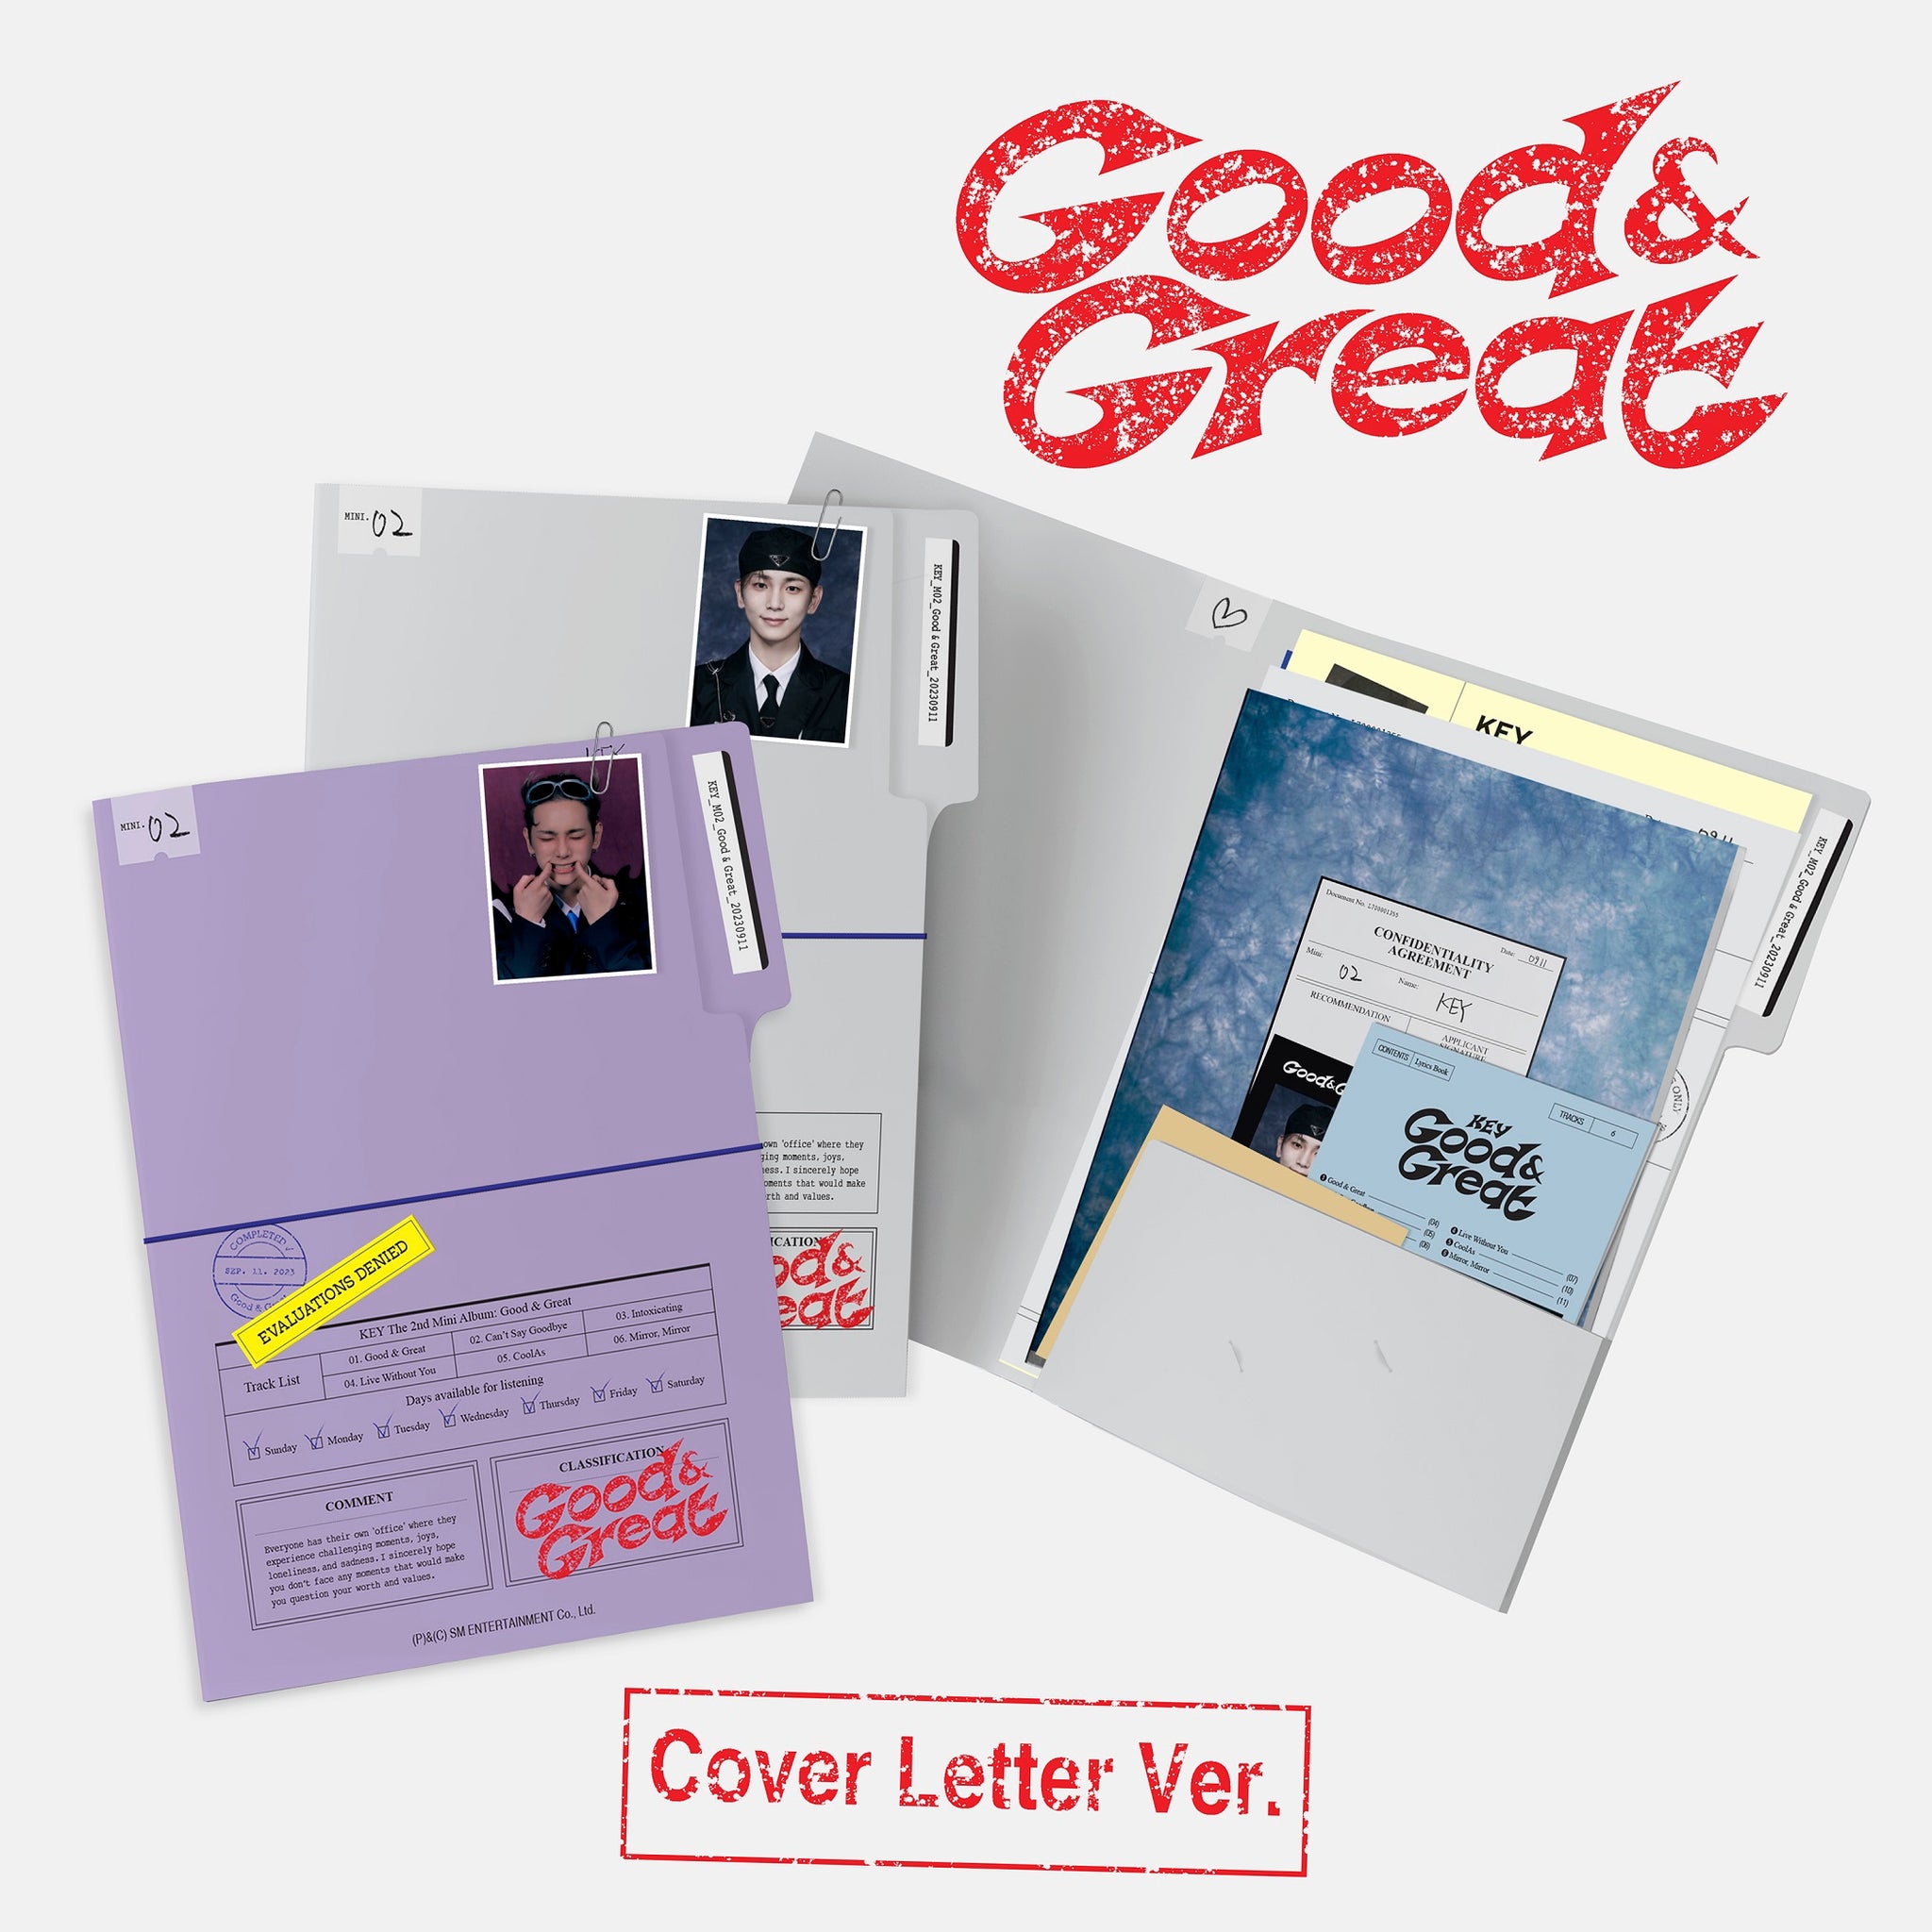 KEY (SHINEE) 2ND MINI ALBUM 'GOOD & GREAT' (COVER LETTER) COVER